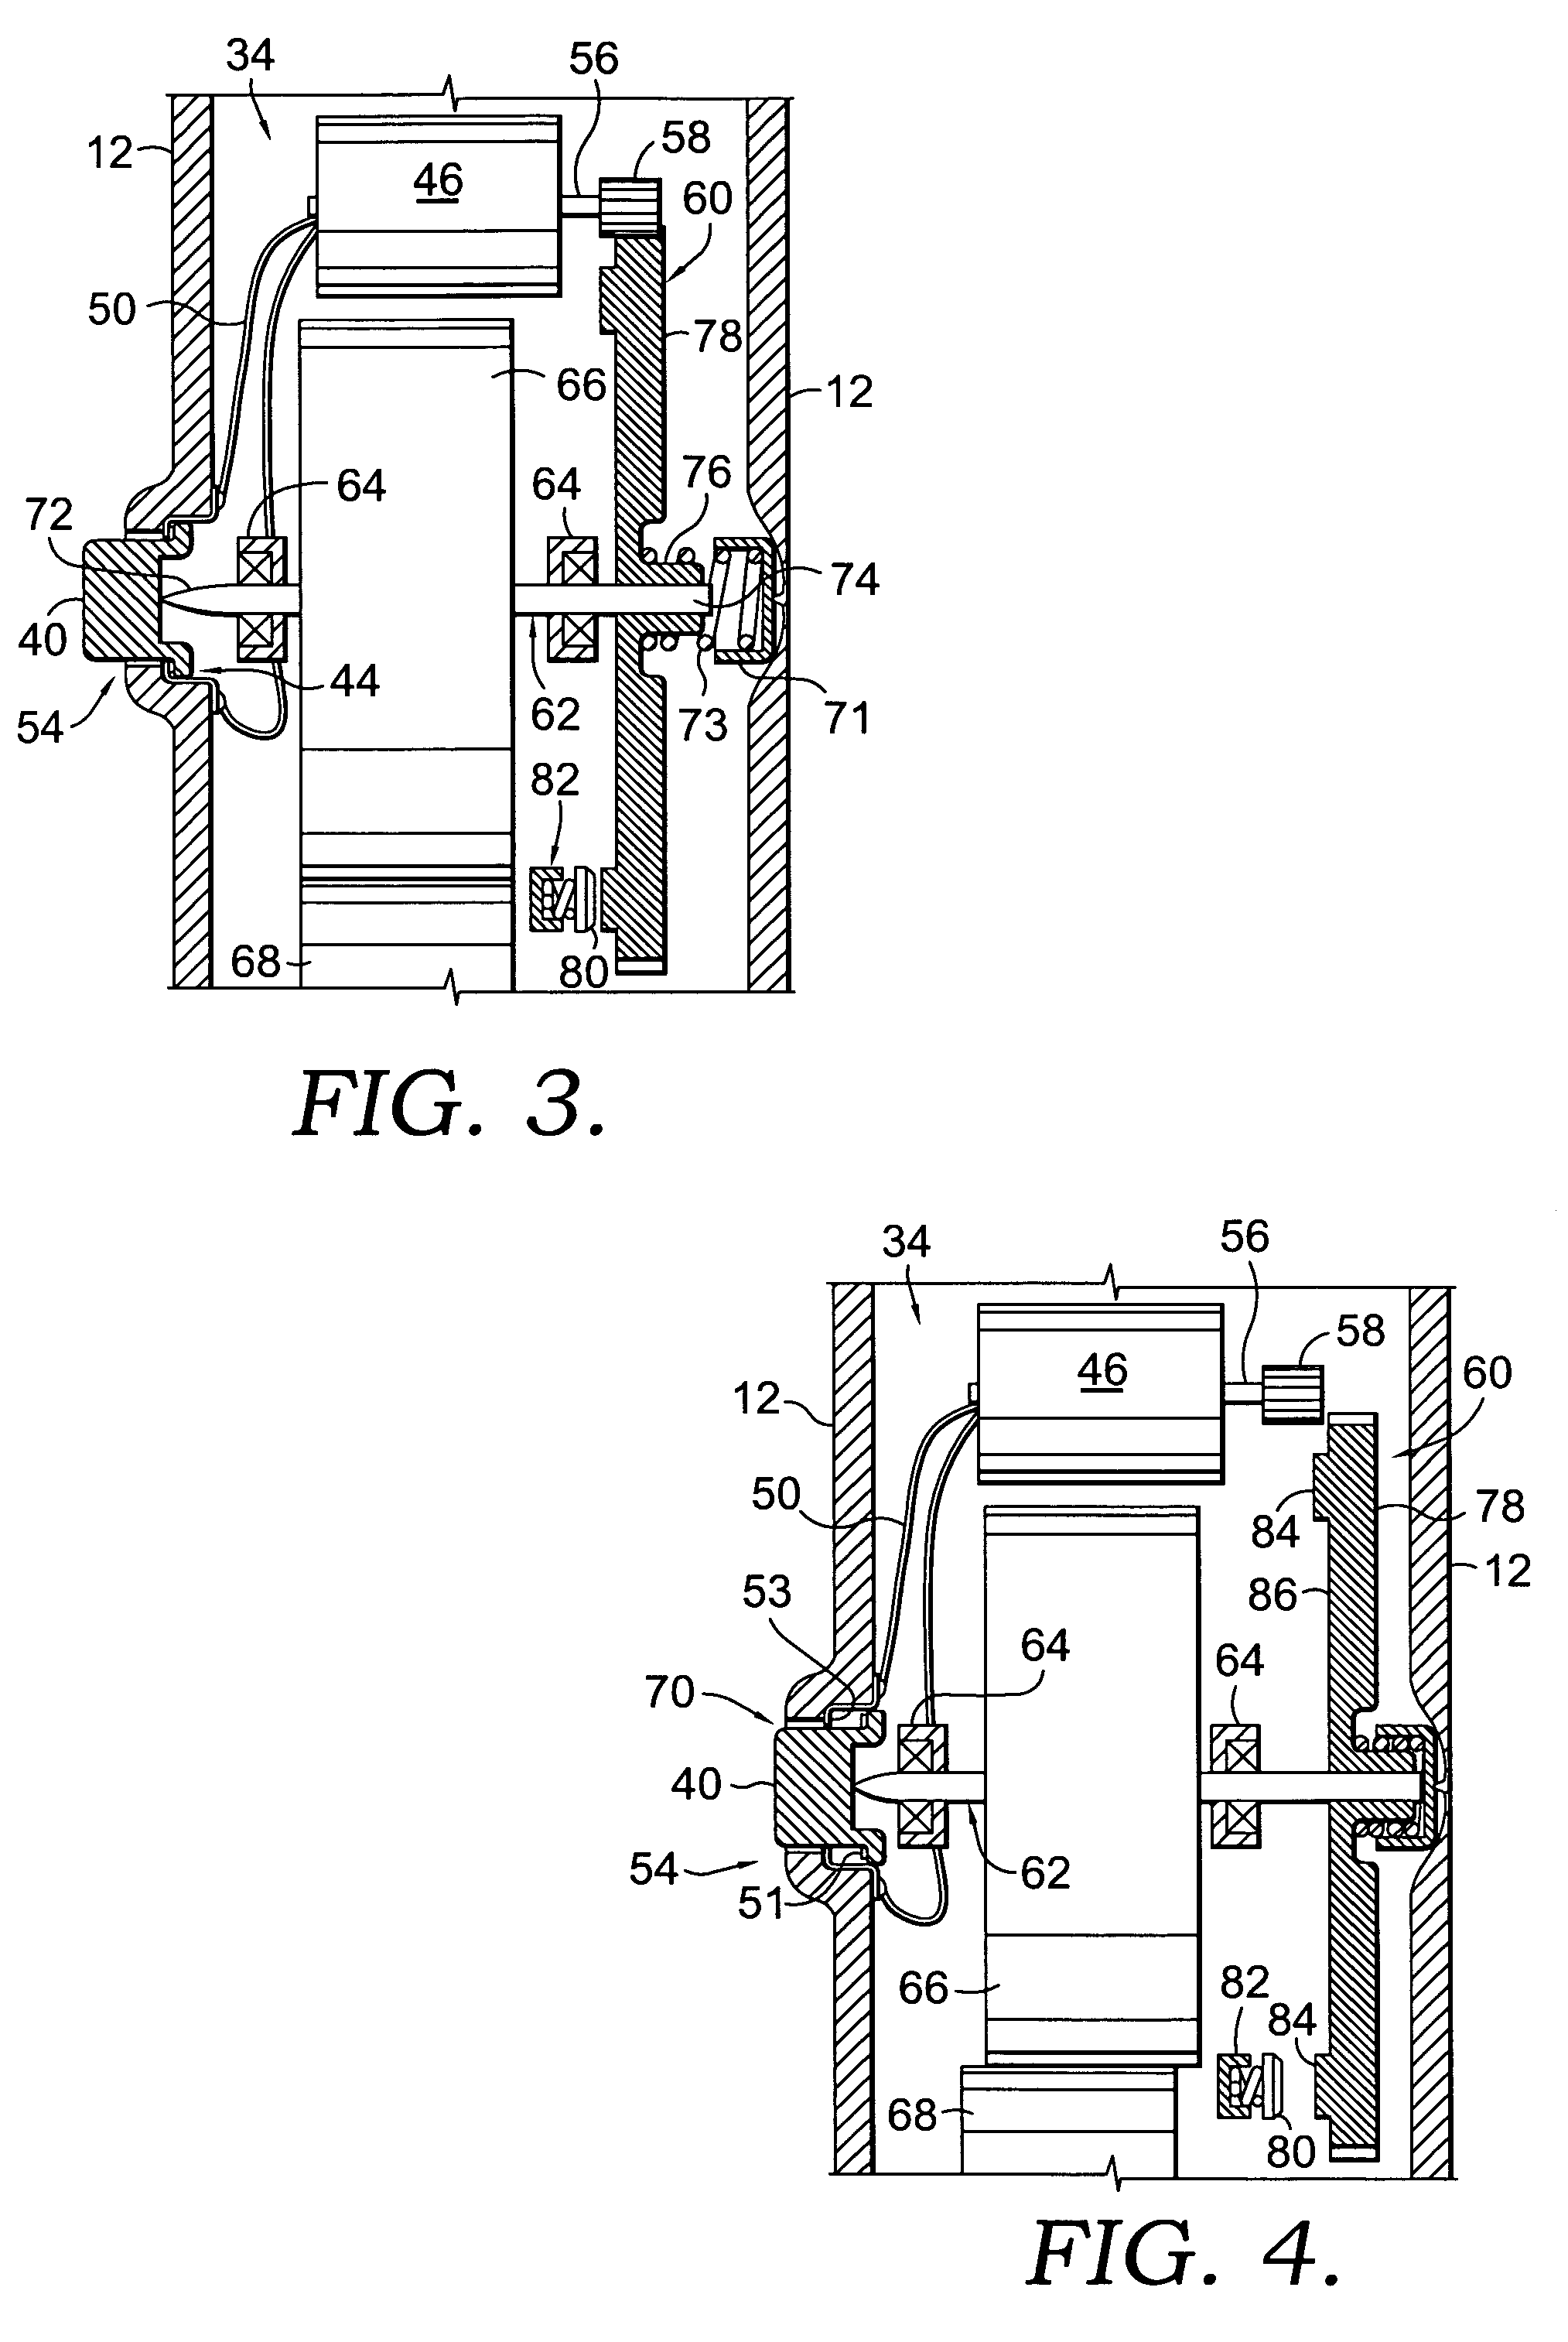 Tape measure utilizing mechanical decoupling of power tape extension feature for tape retraction